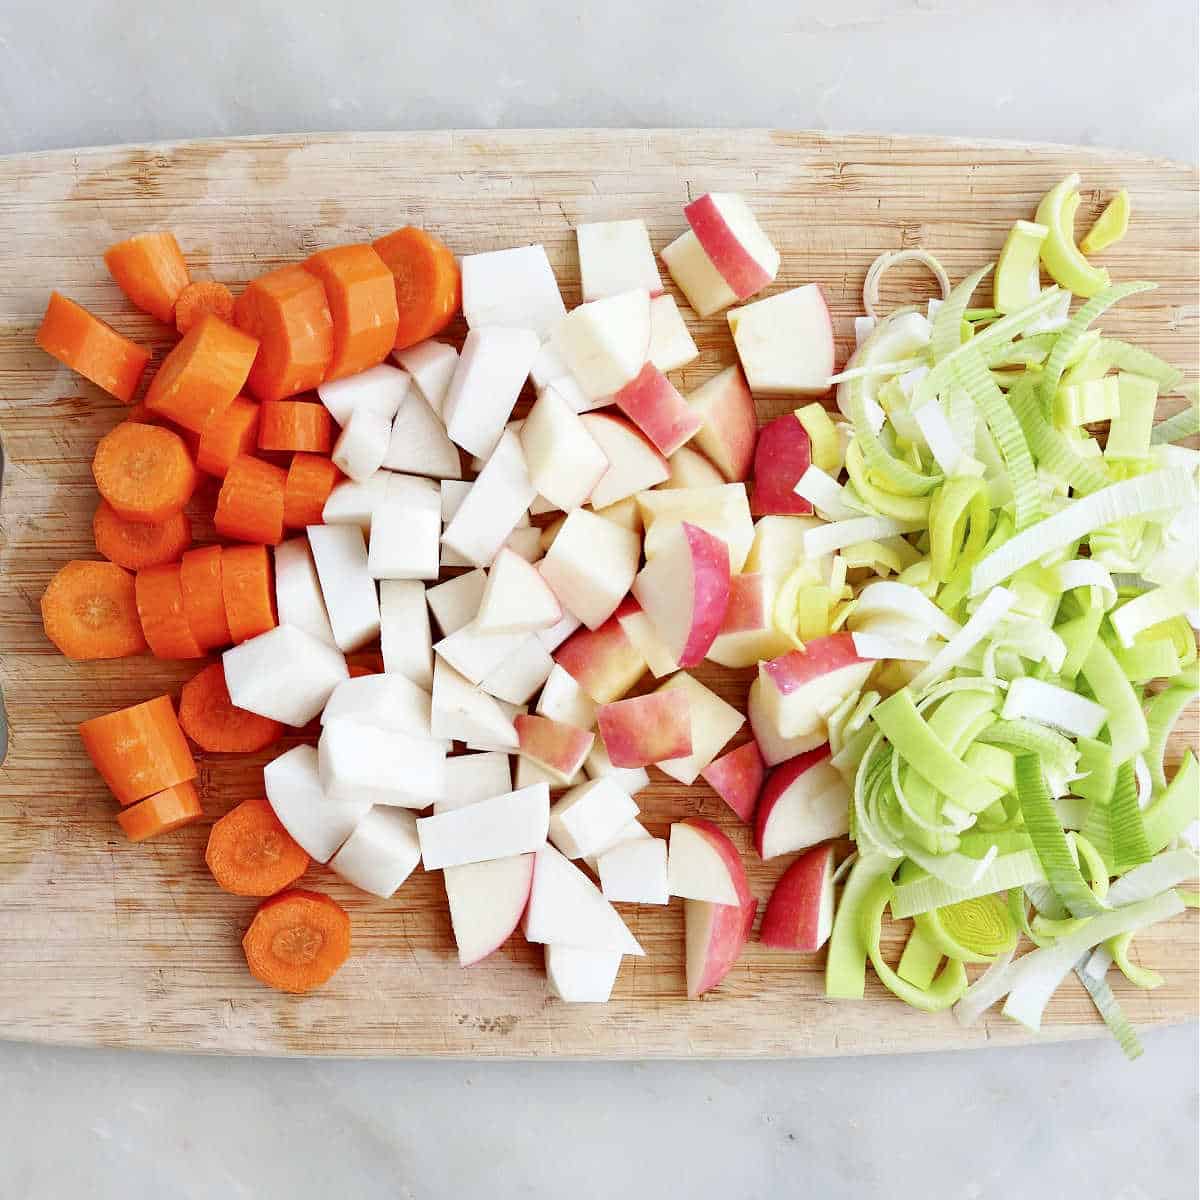 sliced carrots, turnips, apples, and leek on a cutting board